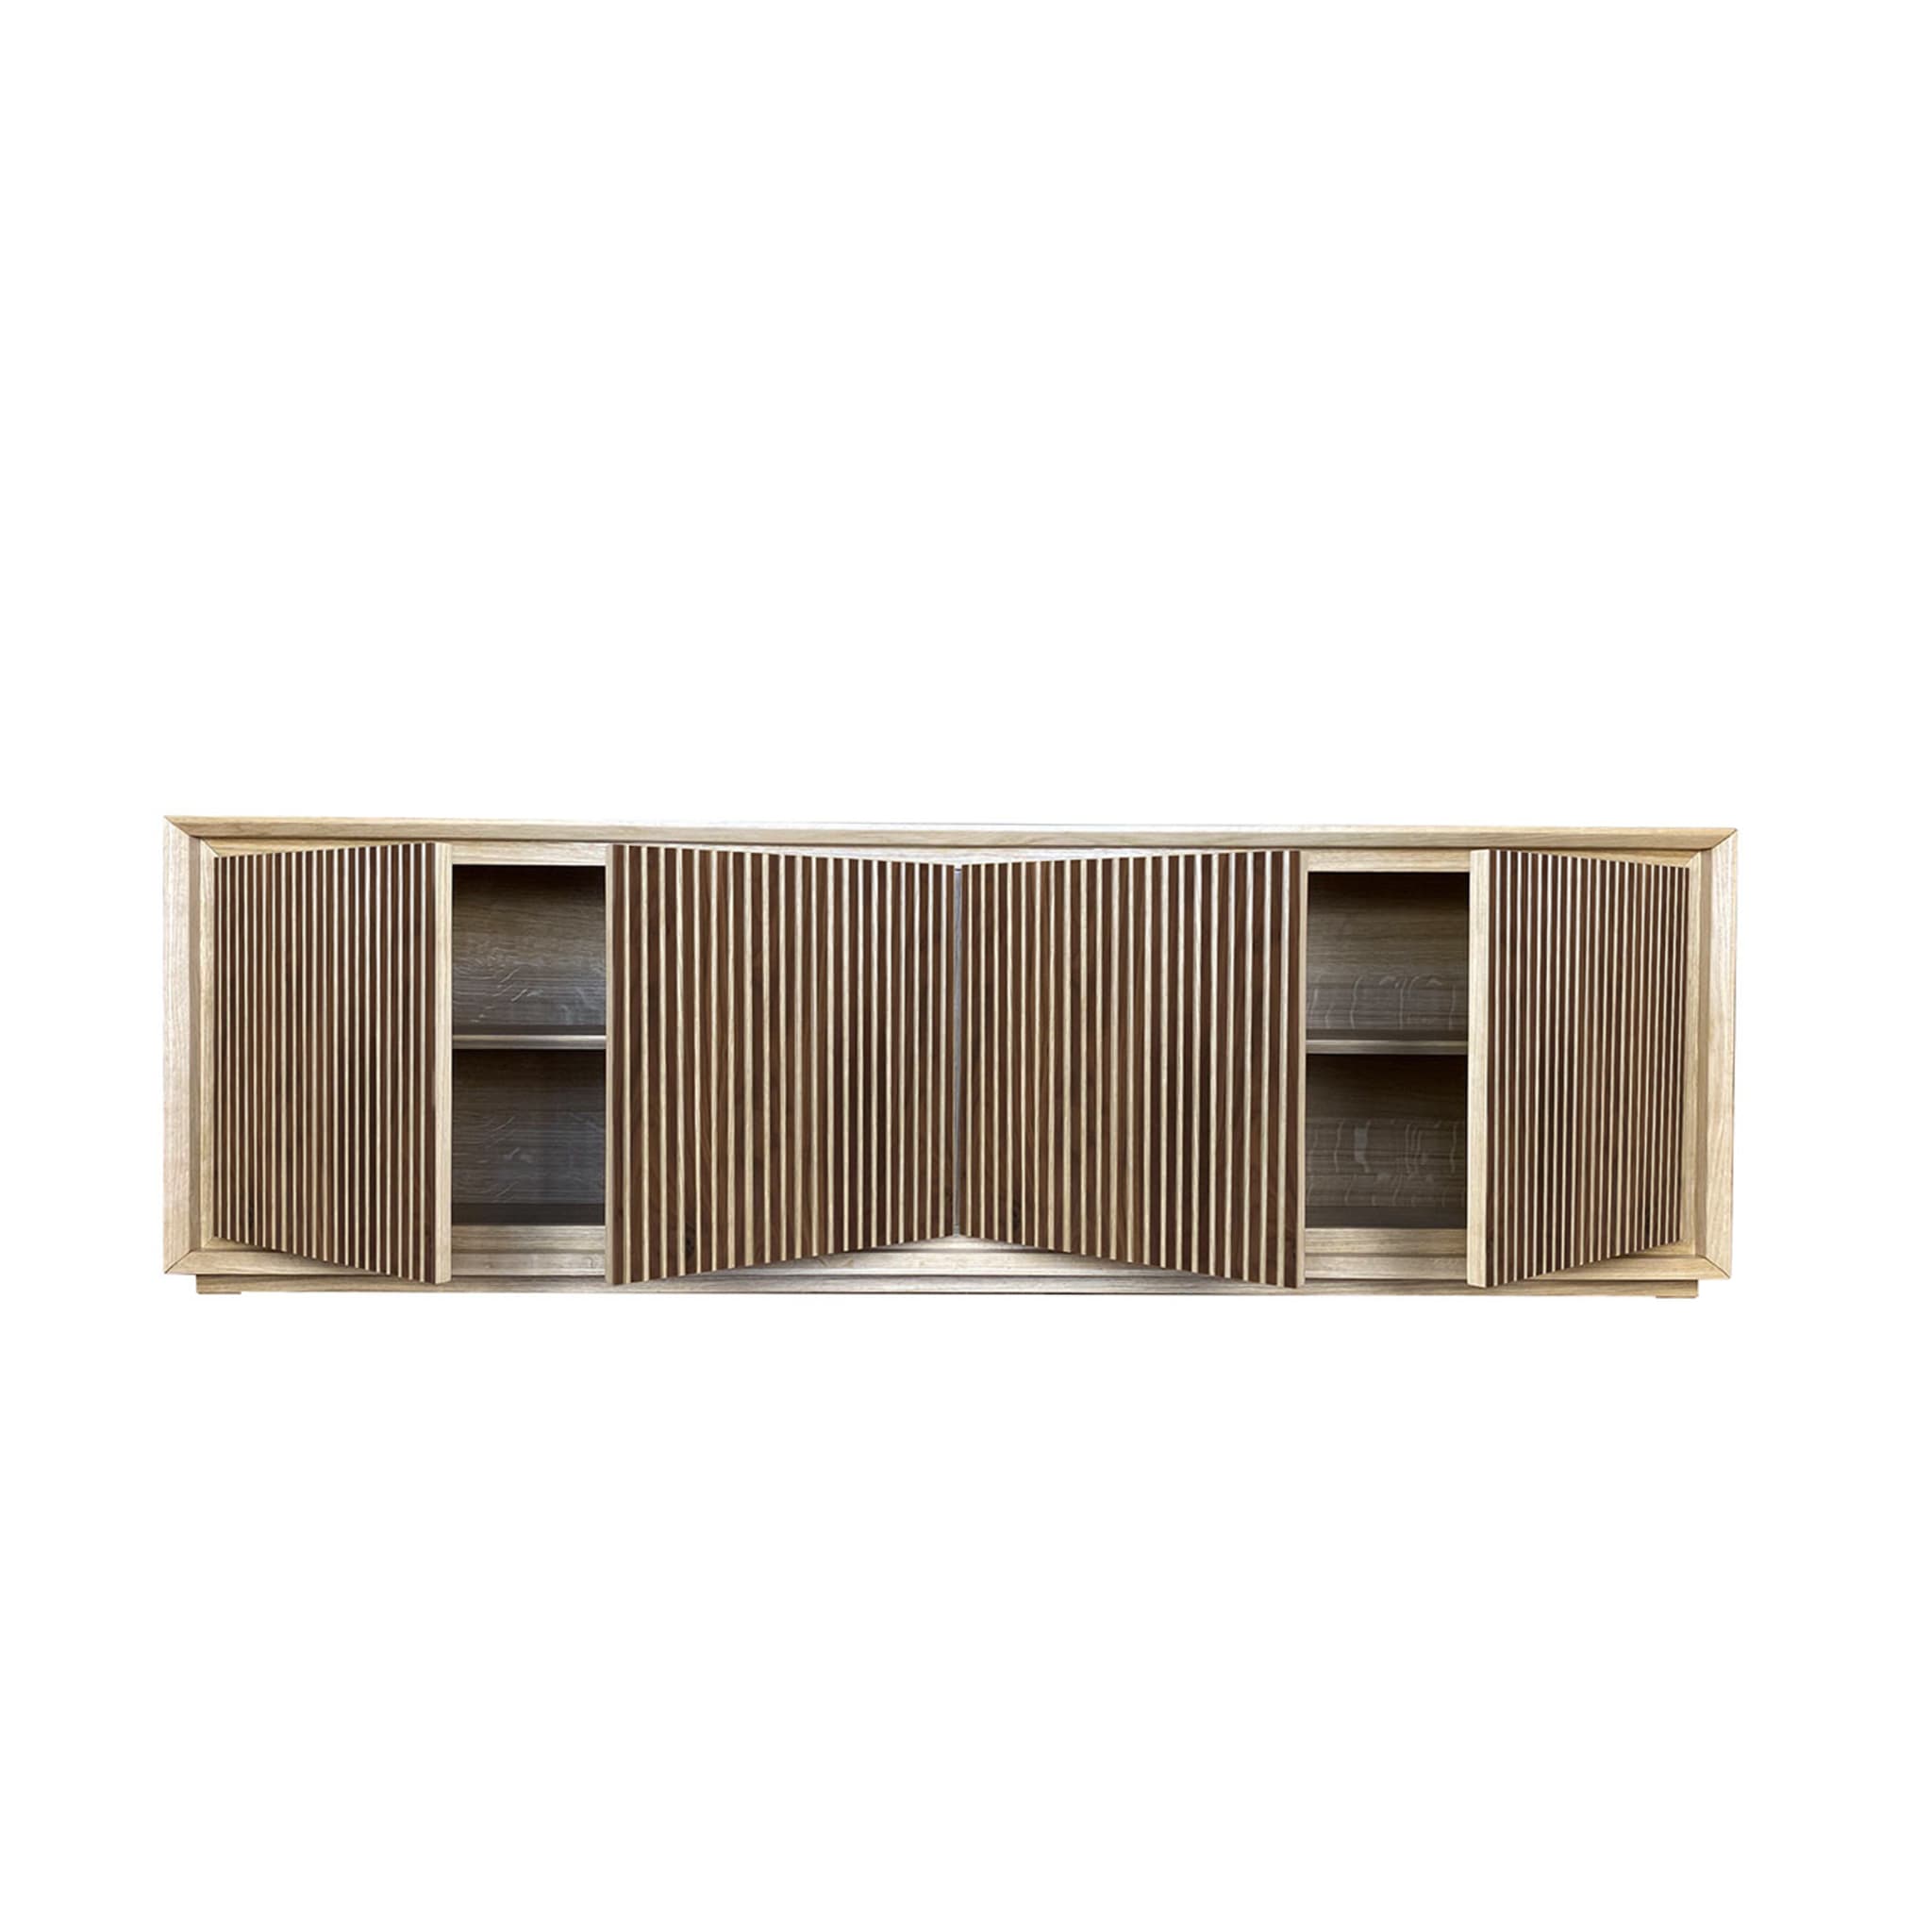 Fuga Noce Due 4-Door Grooved Sideboard by Mascia Meccani - Alternative view 2